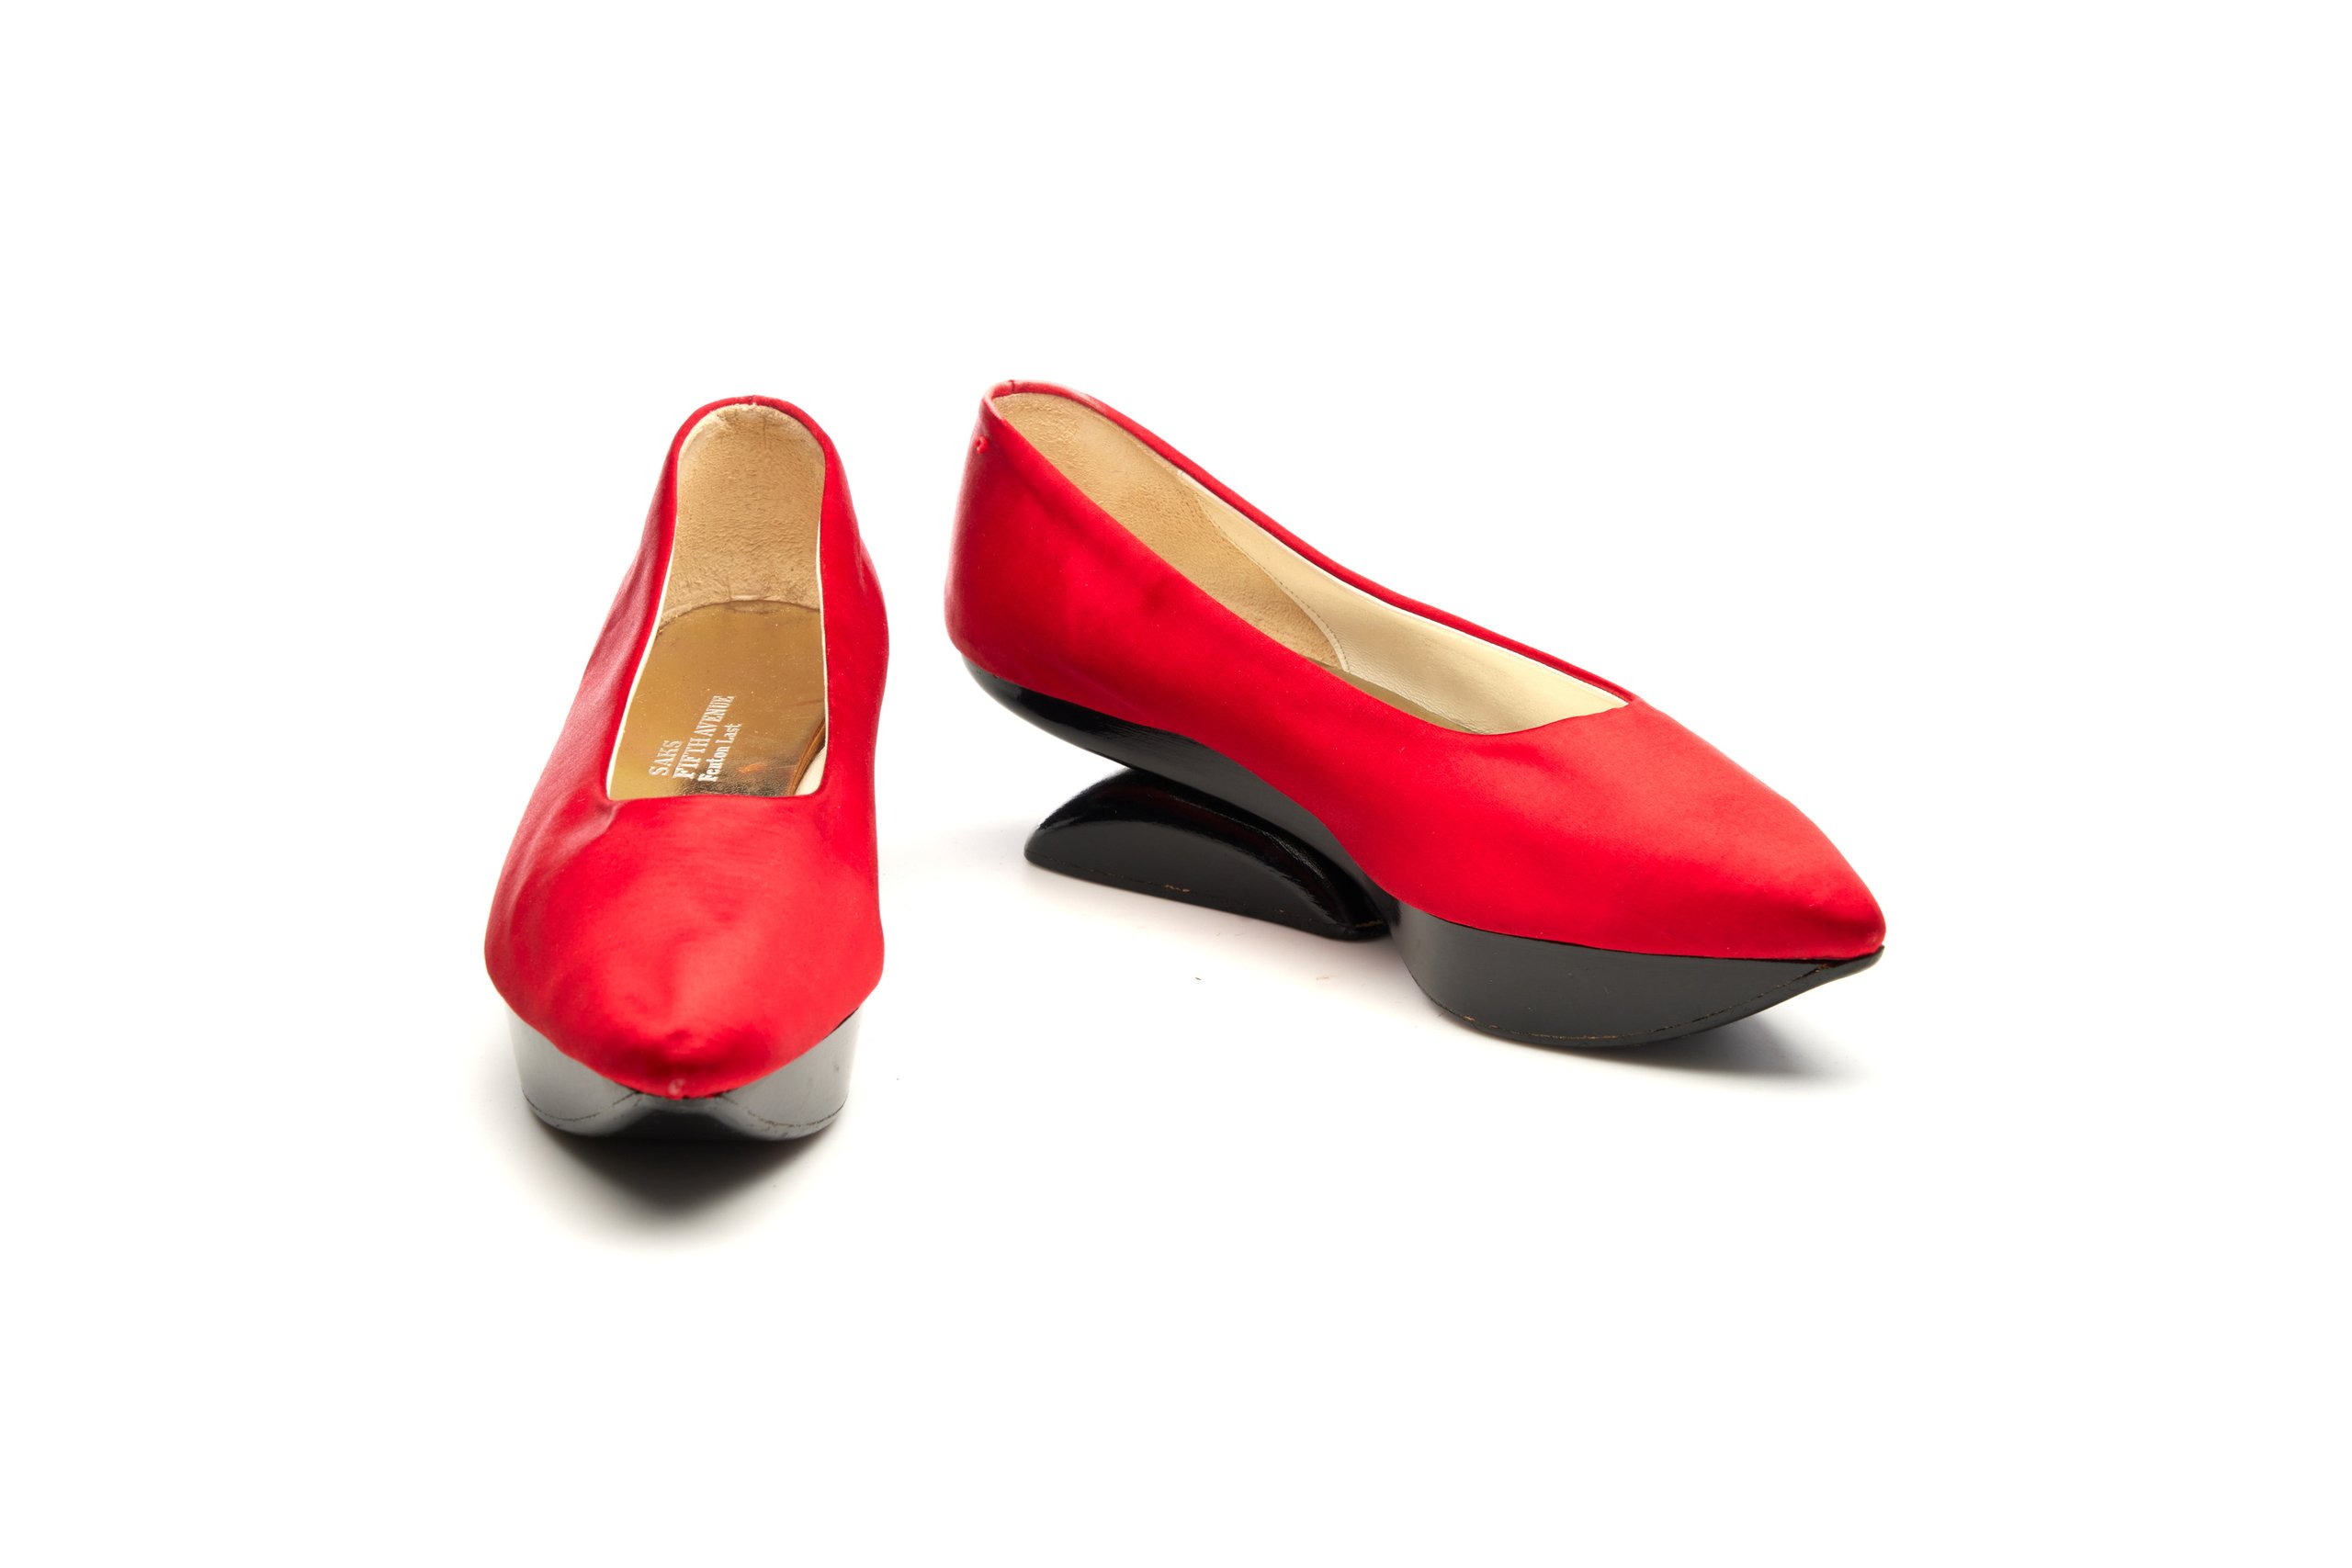 Pair of womens Kabuki shoes by Beth Levine for Saks Fith Avenue